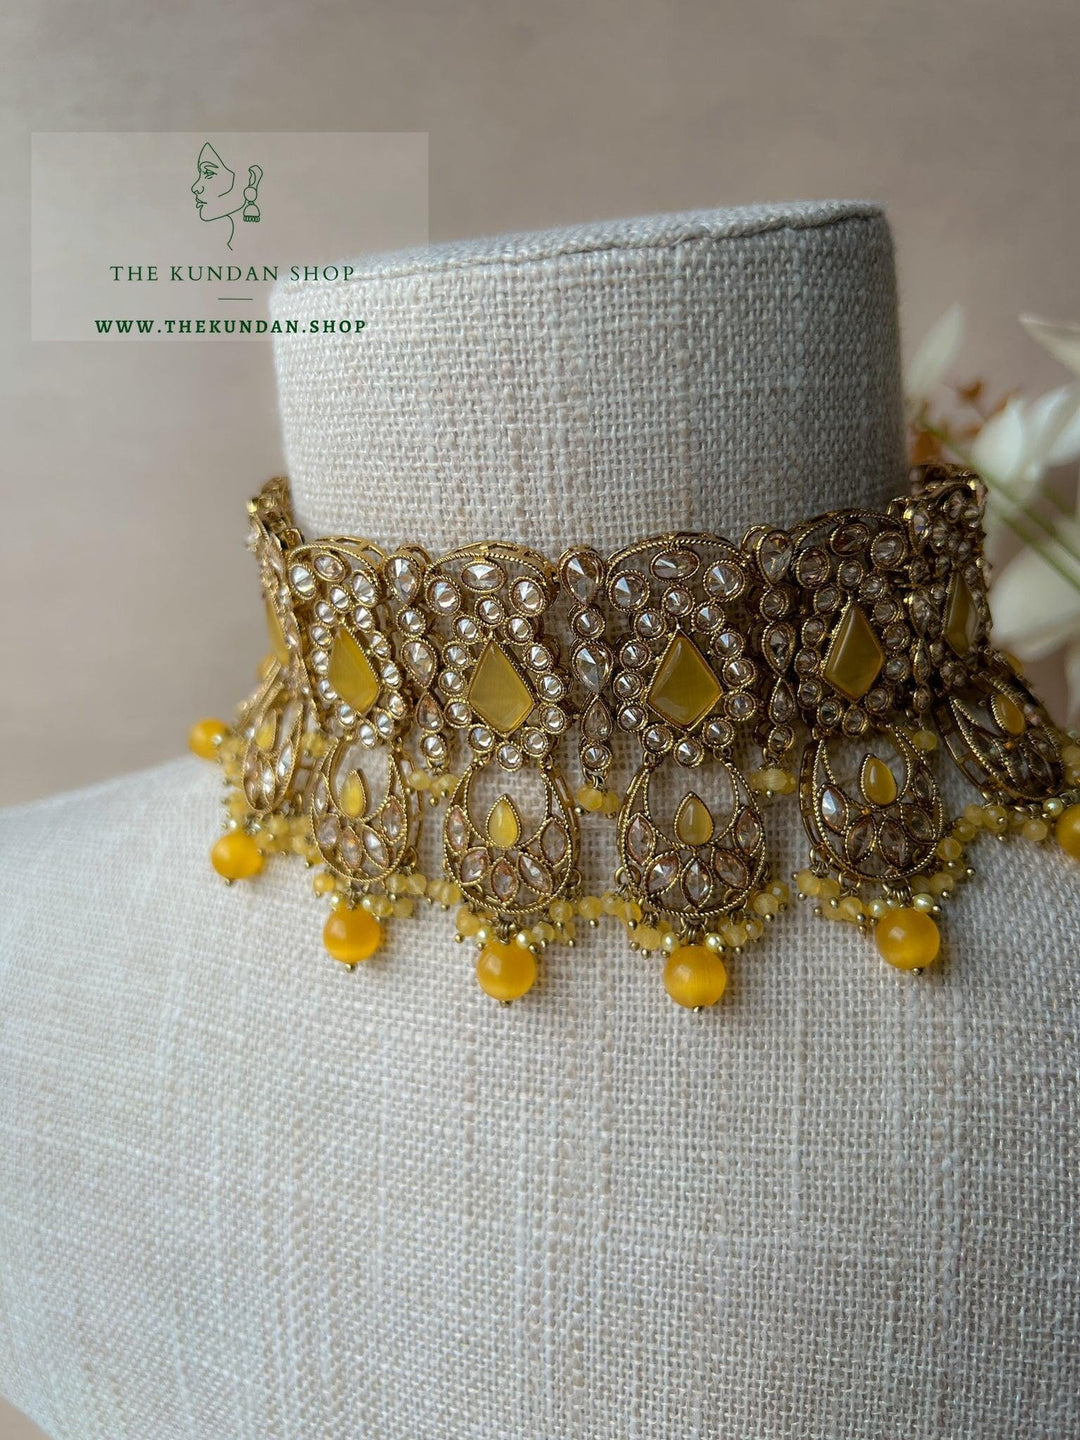 Promising Polki in Yellow Necklace Sets THE KUNDAN SHOP 